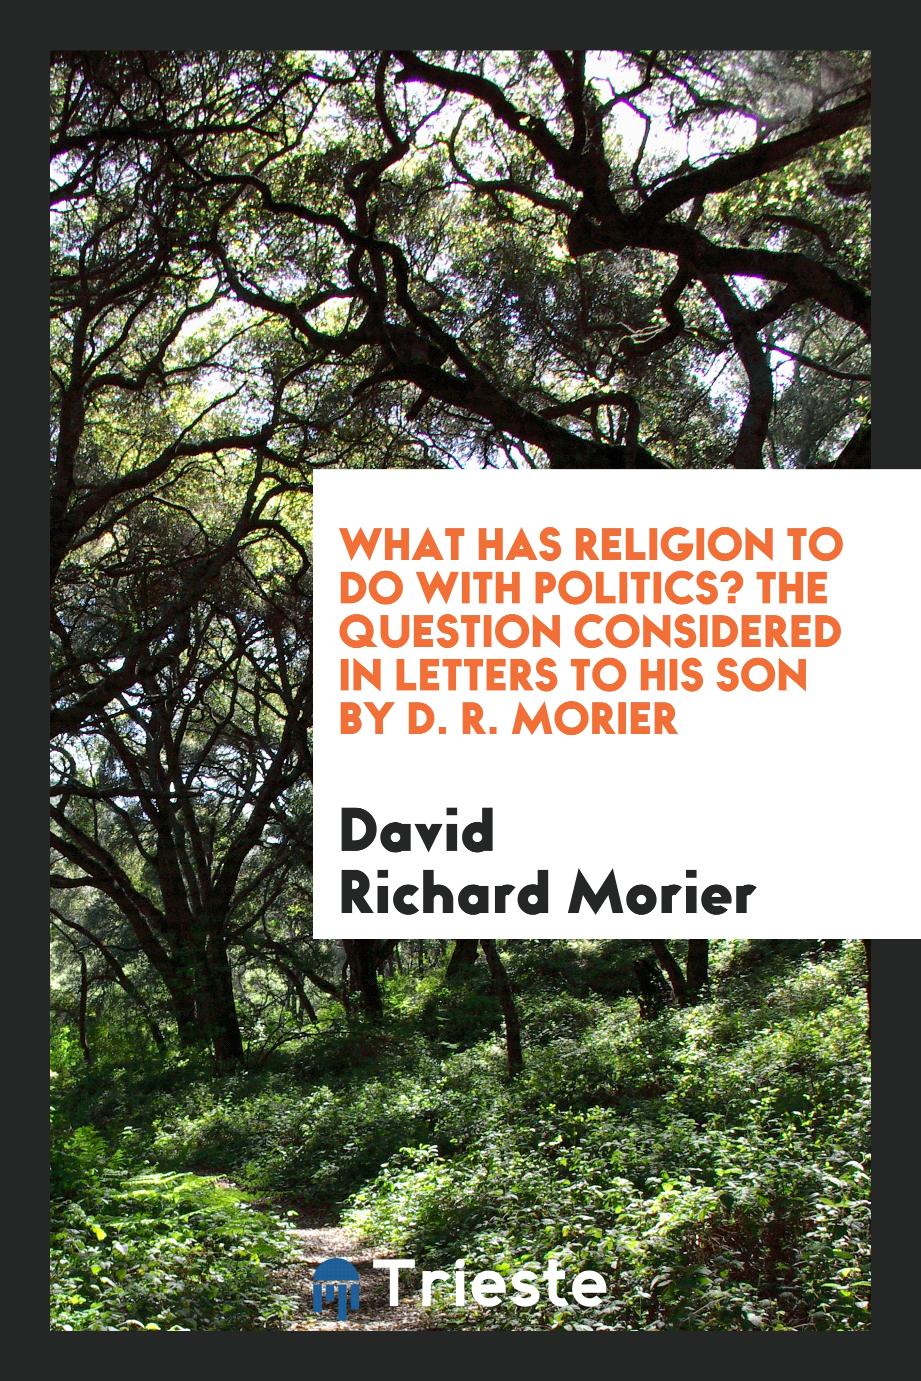 What Has Religion to Do with Politics? The Question Considered in Letters to His Son by D. R. Morier